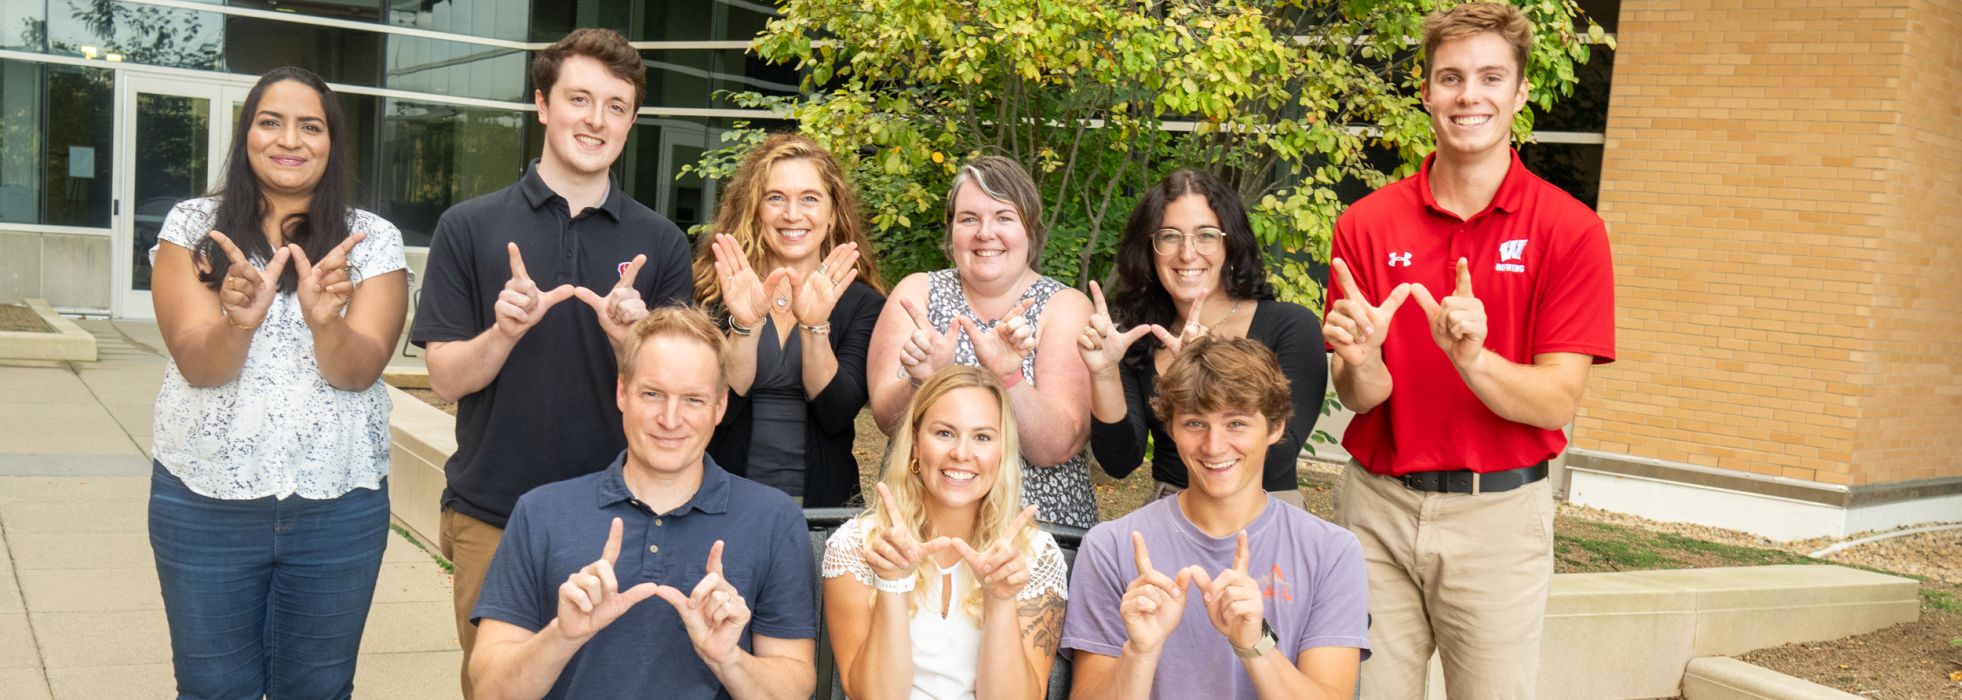 Outdoor photo of Dr. Lee Eckhardt's lab team making "W" sign with hands